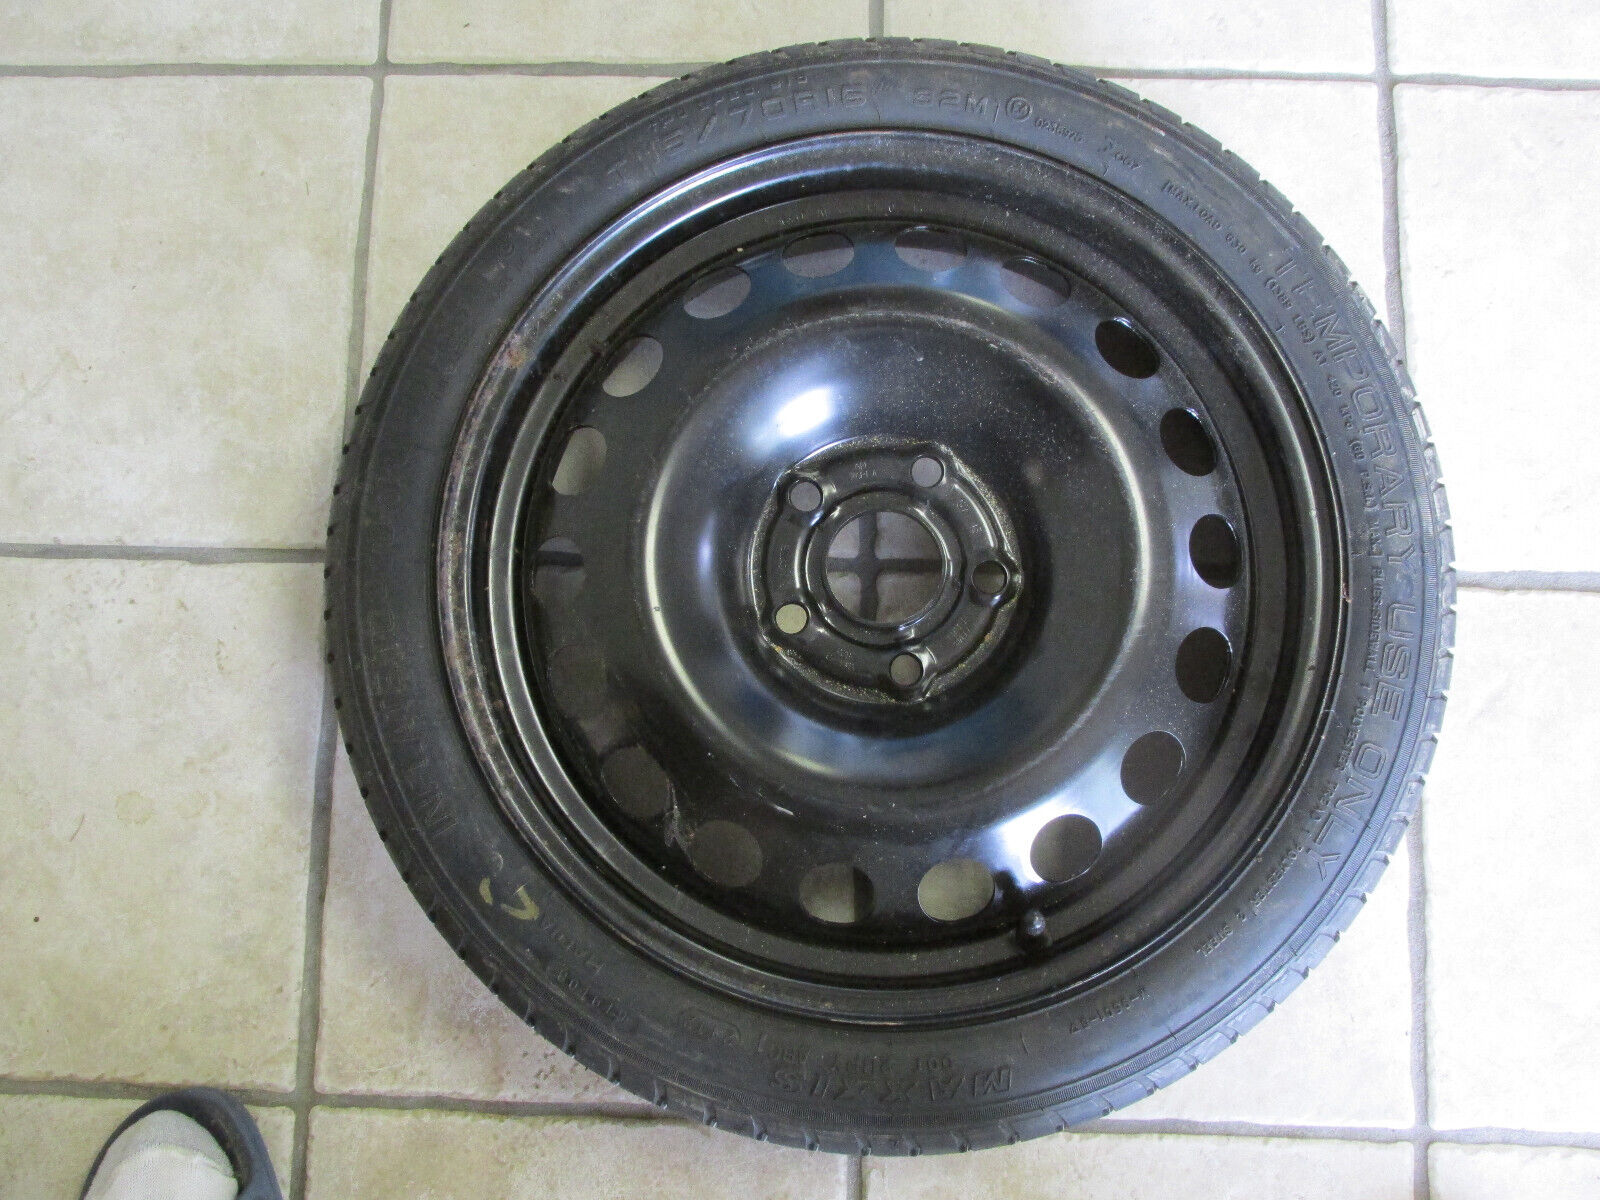 2012-2020 Chevrolet Sonic Spare Tire Compact Donut OEM T115/70R16 New